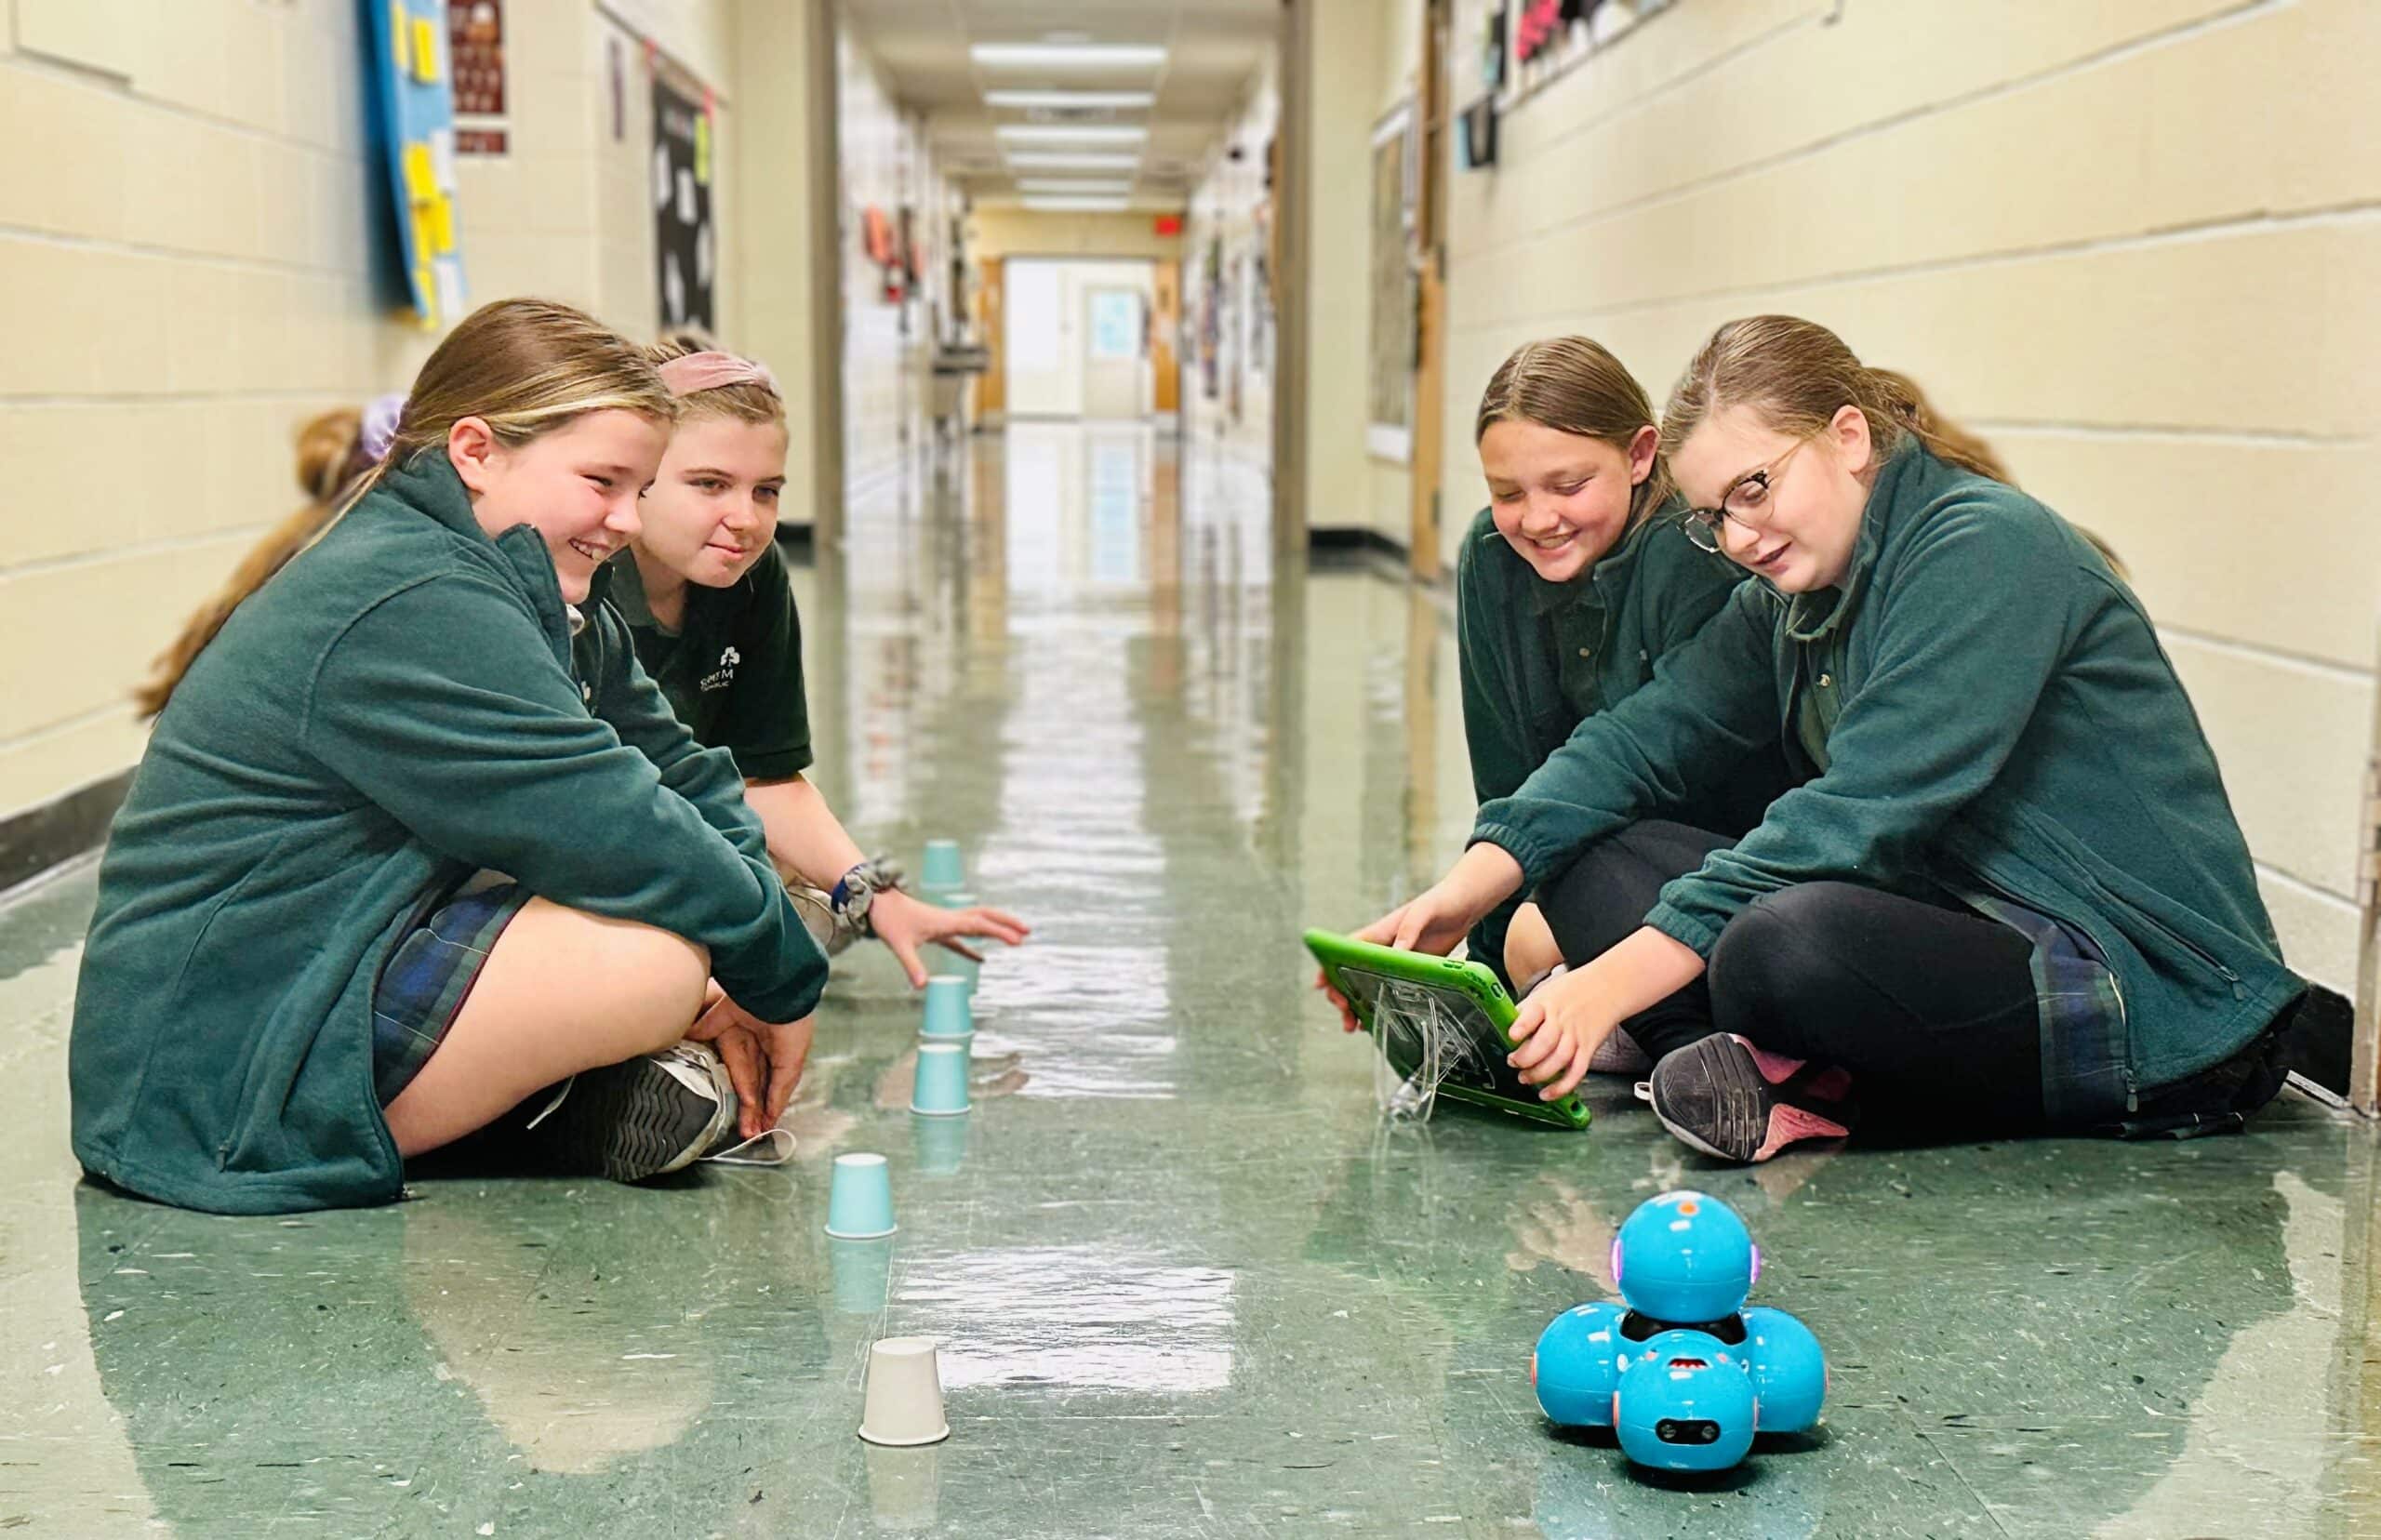 Four girls playing with robots in a hallway.